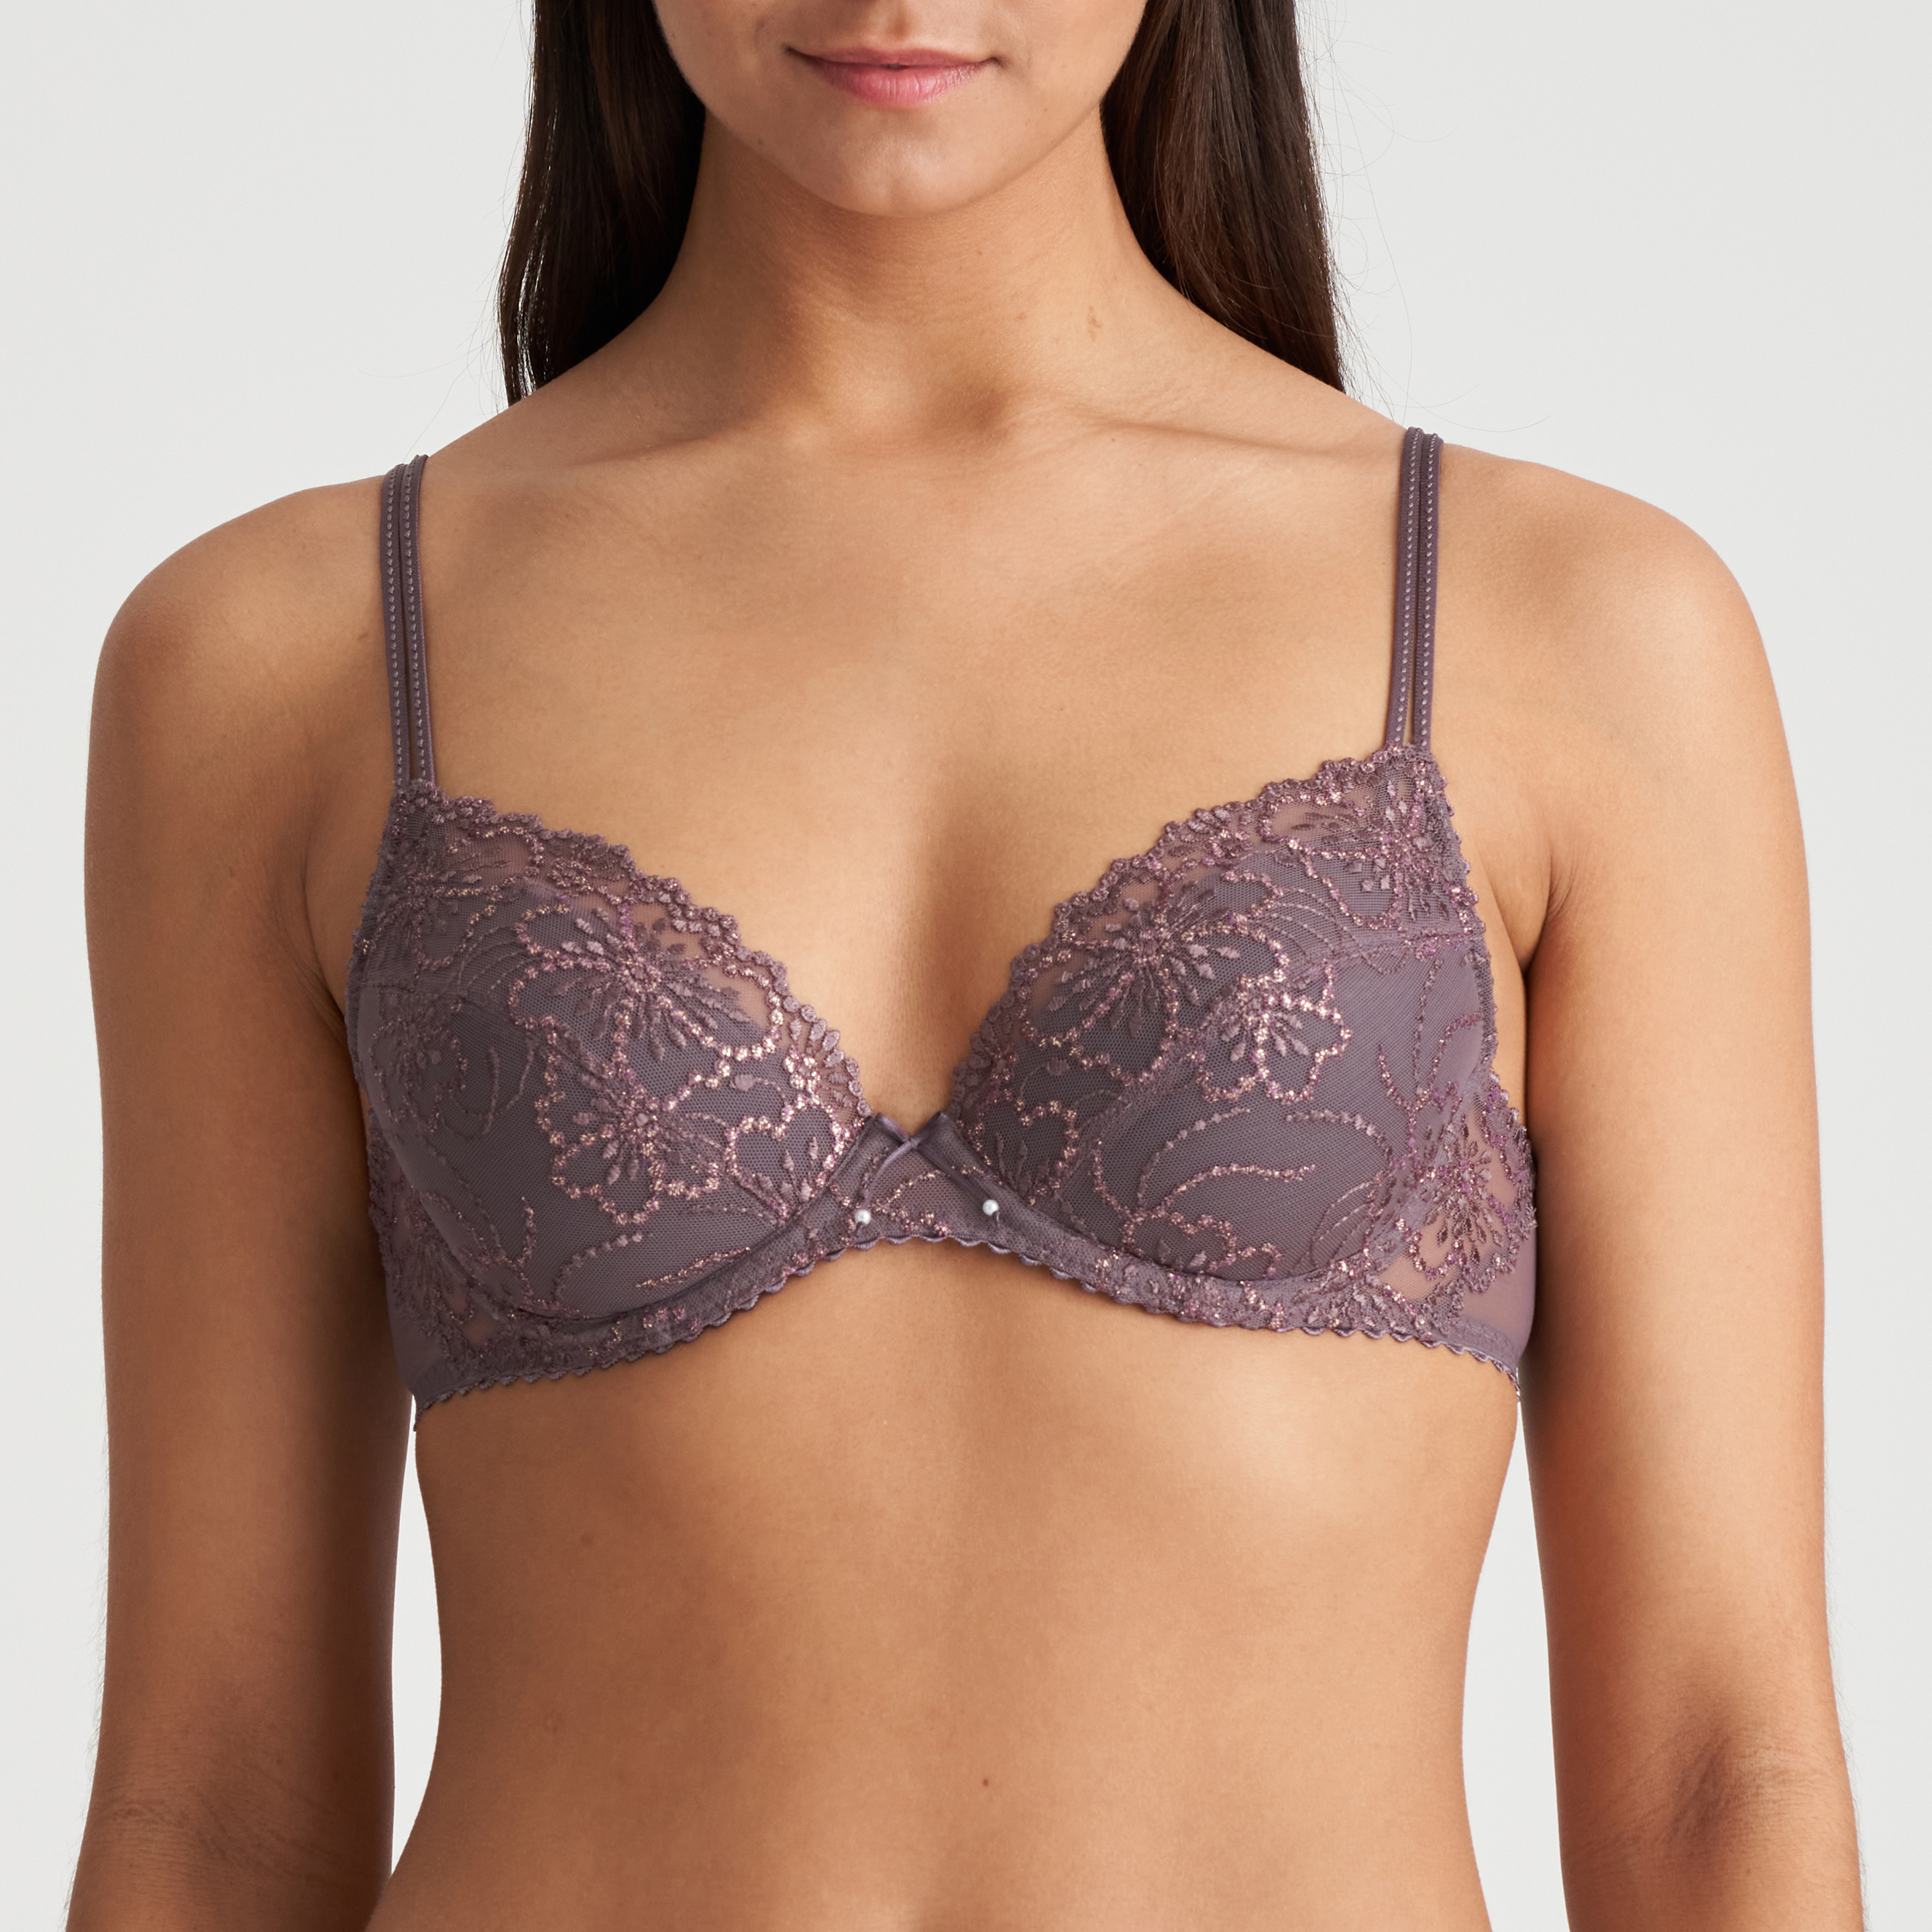 Underwired Lace Push Up Bra With Removable Pads Naturana 7107